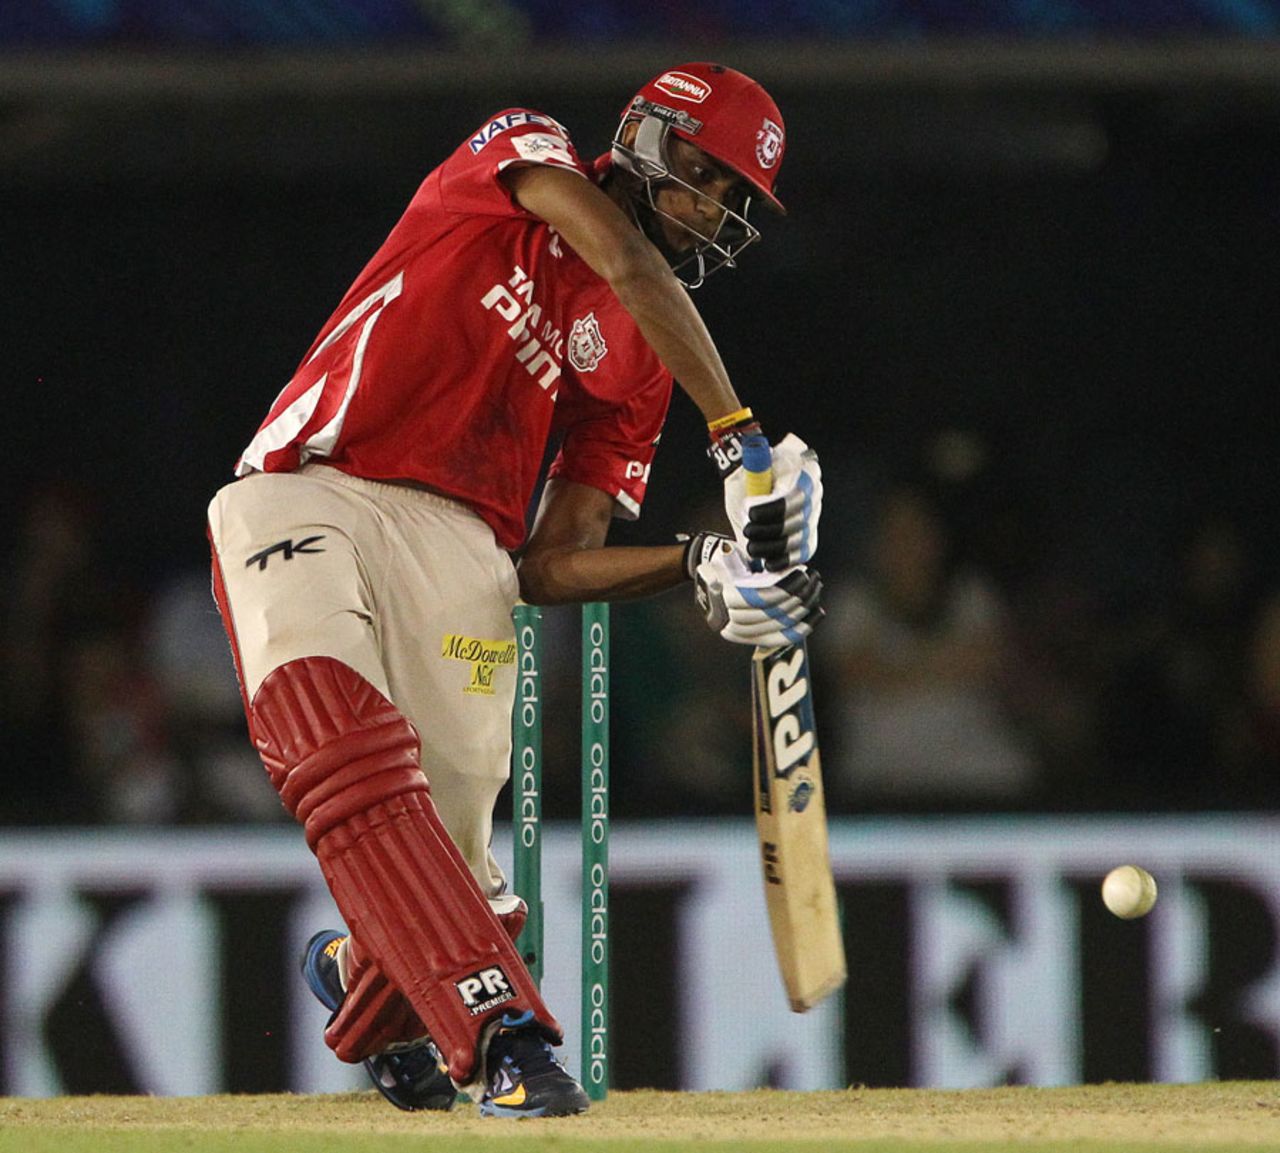 Akshar Patel made sure there were no hiccups at the end of the chase, Kings XI Punjab v Barbados Tridents, Champions League T20, Mohali, September 20, 2014